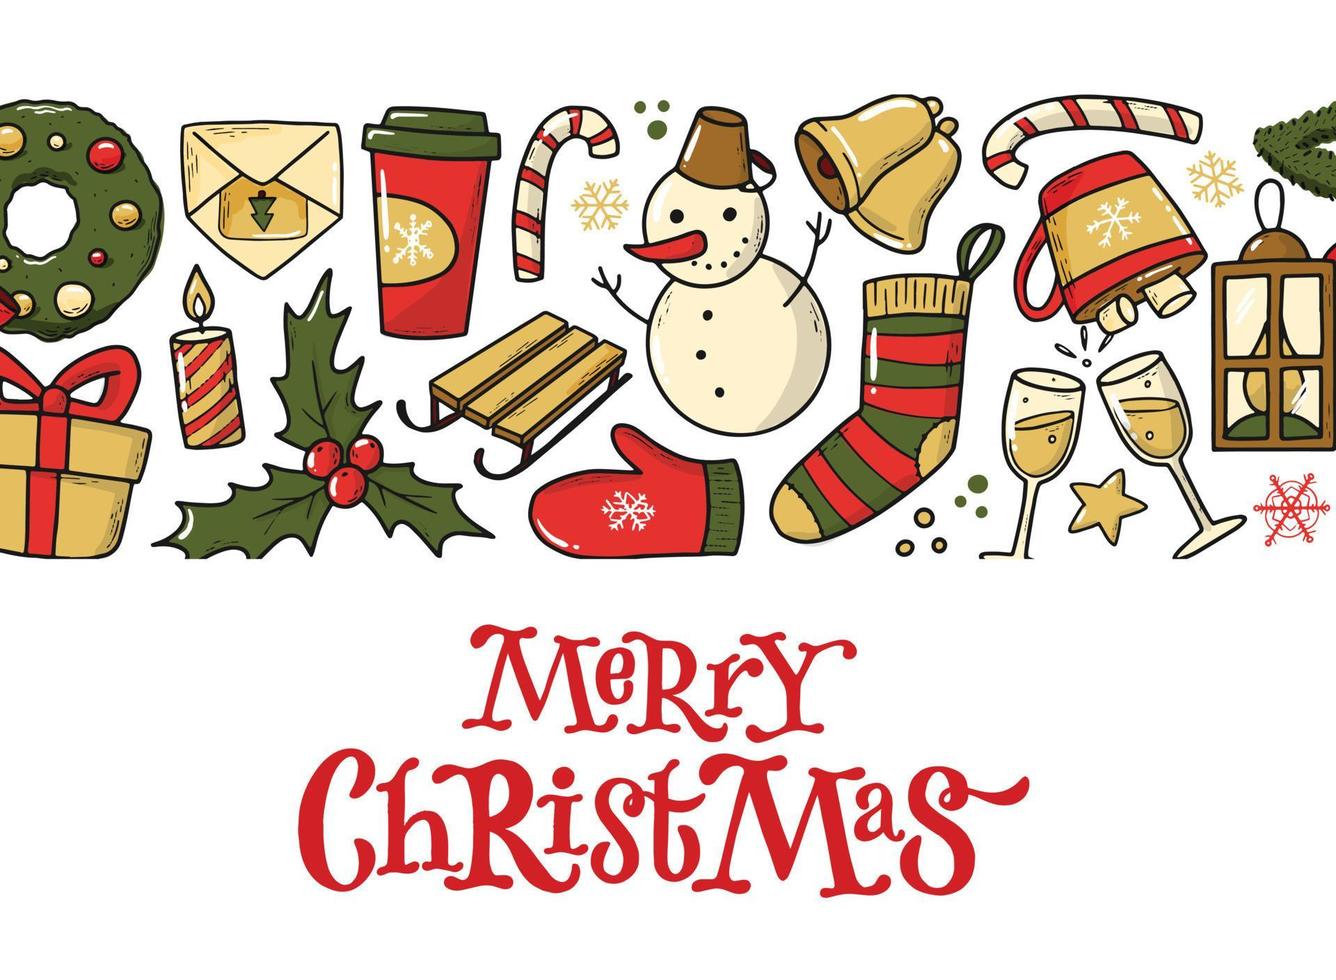 Merry christmas lettering quote for posters, prints, greeting cards, invitations, etc. EPS 10 vector